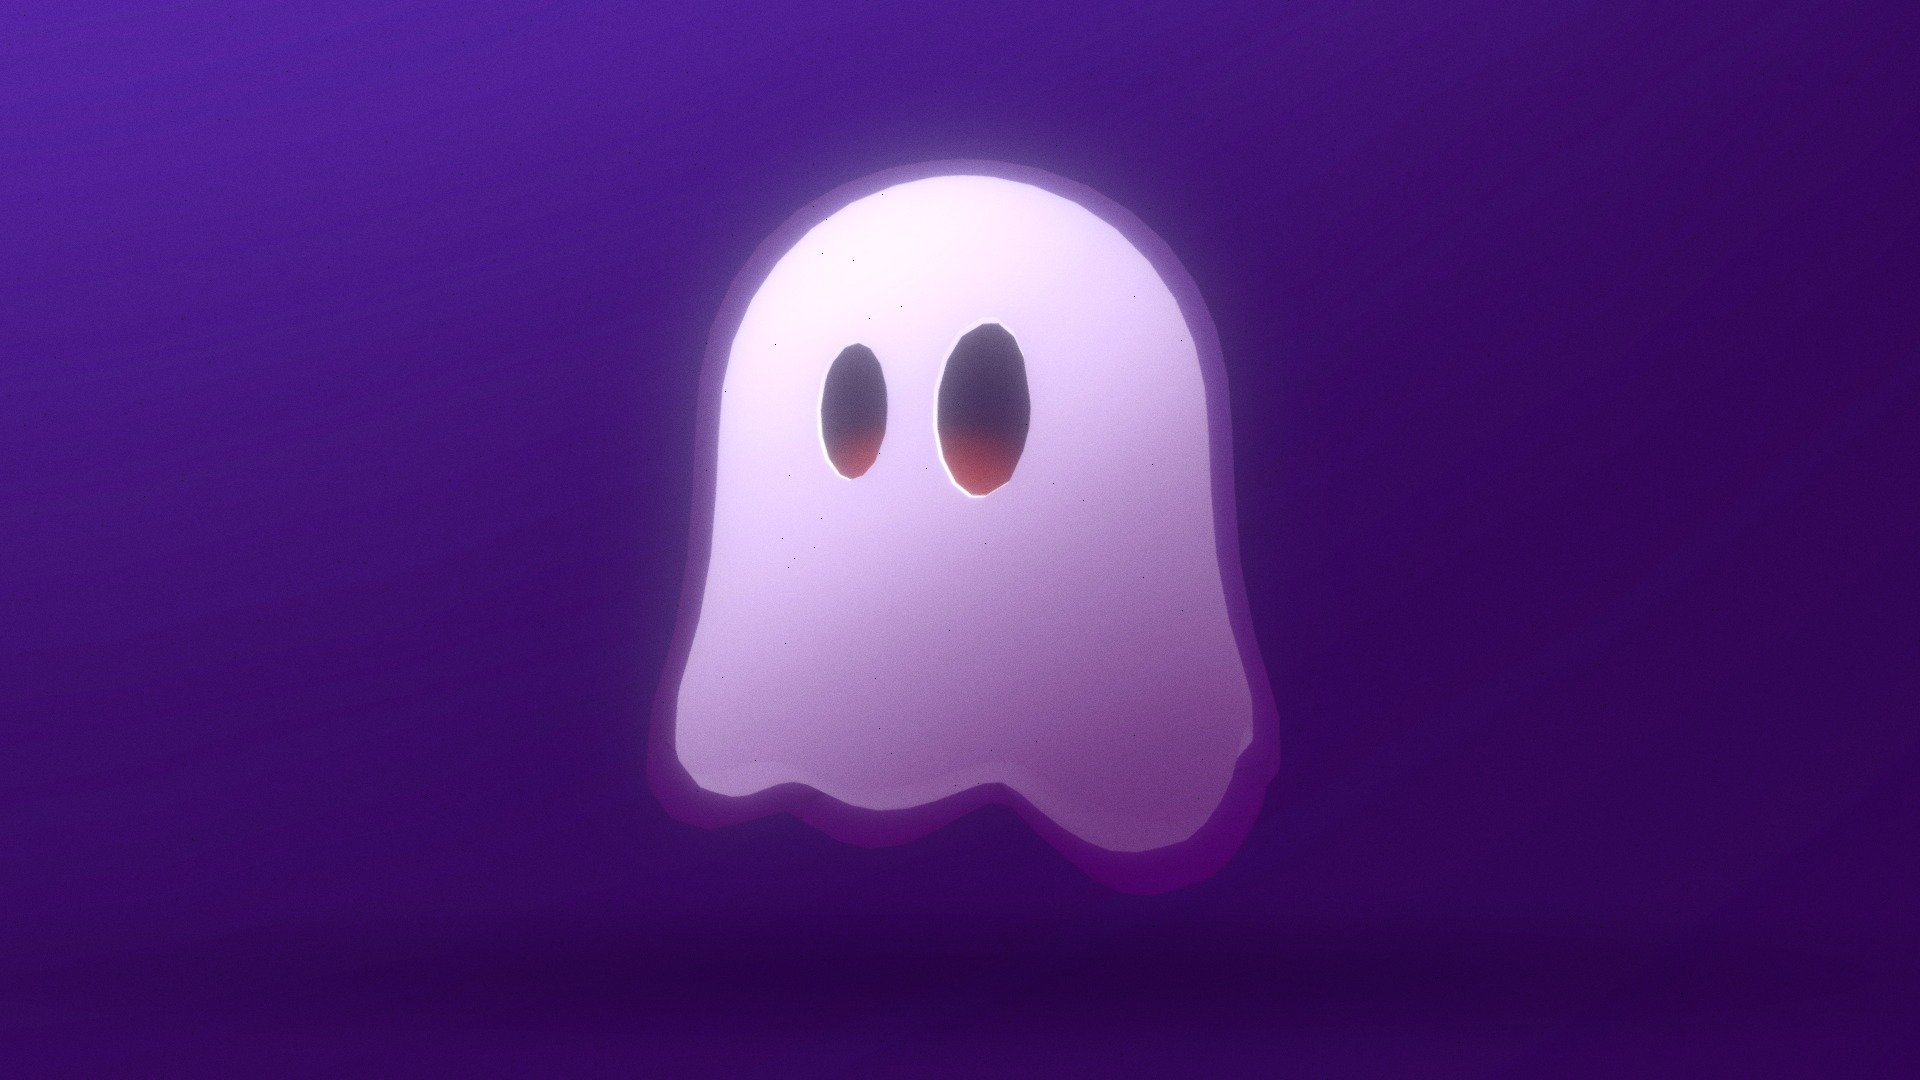 cute ghost.

Textured with gradient atlas, so it is performant for mobile games and video games.

Like a few of my other assets in the same style, it uses a single texture diffuse map and is mapped using only color gradients. 
All gradient textures can be extended and combined to a large atlas.

There are more assets in this style to add to your game scene or environment. Check out my sale.

If you want to change the colors of the assets, you just need to move the UVs on the atlas to a different gradient.
Or contact me for changes, for a small fee.

**I also accept freelance jobs. Do not hesitate to write me. **

*-------------Terms of Use--------------

Commercial use of the assets  provided is permitted but cannot be included in an asset pack or sold at any sort of asset/resource marketplace.*

9213140

5207418 - Cute Ghost Halloween - Buy Royalty Free 3D model by Stylized Box (@Stylized_Box) 3d model